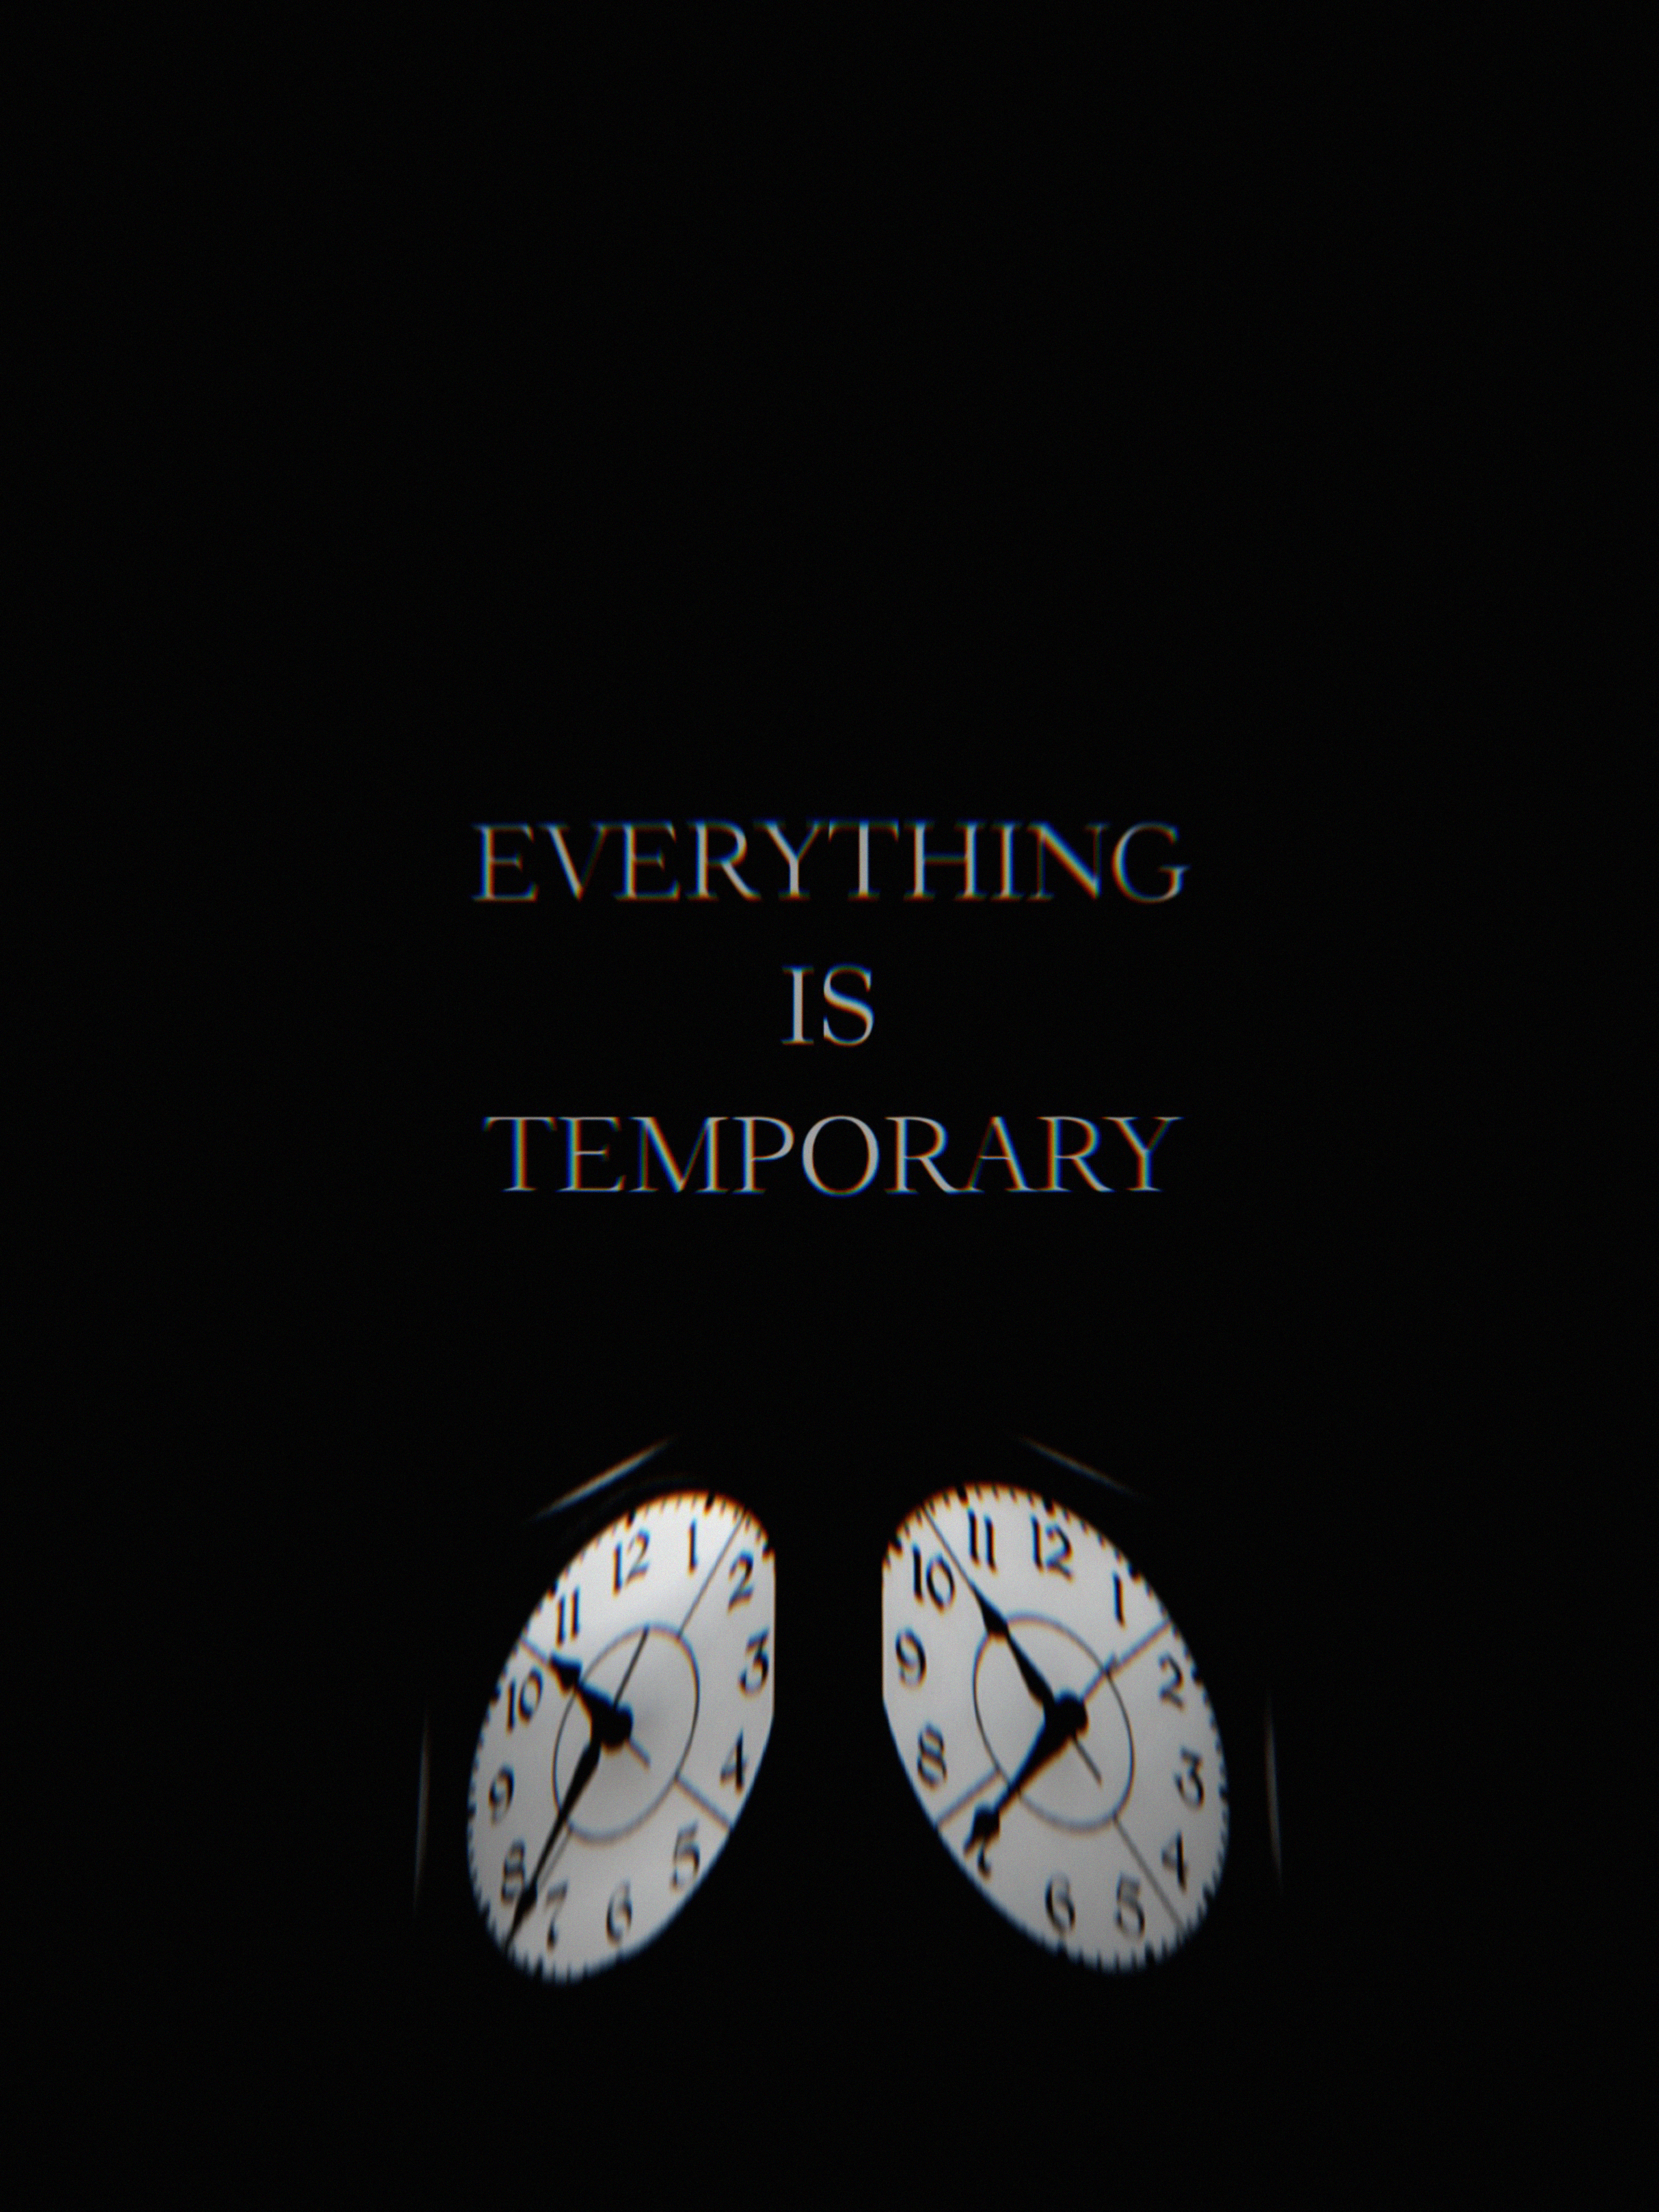 clock, words, life, glitch, time, it's time, temporary UHD